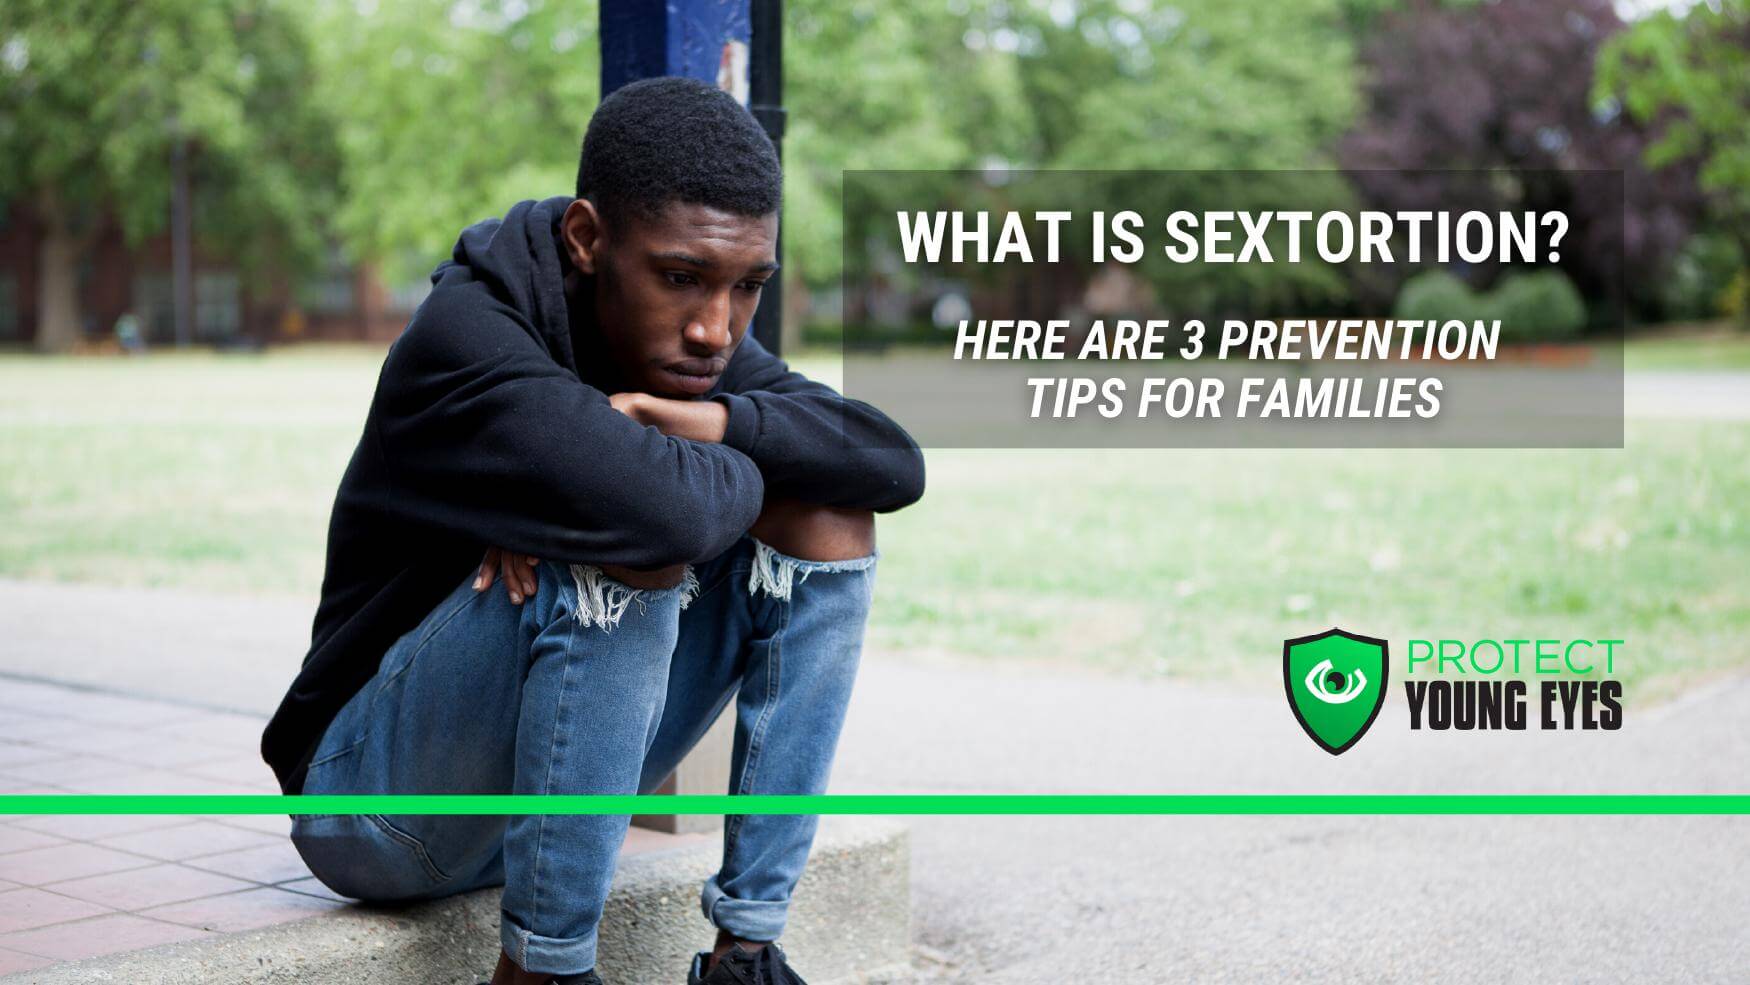 Xxx Hd Video Bangal 18 Year Ood - What is Sextortion? 3 Prevention Tips for Families - Protect Young Eyes